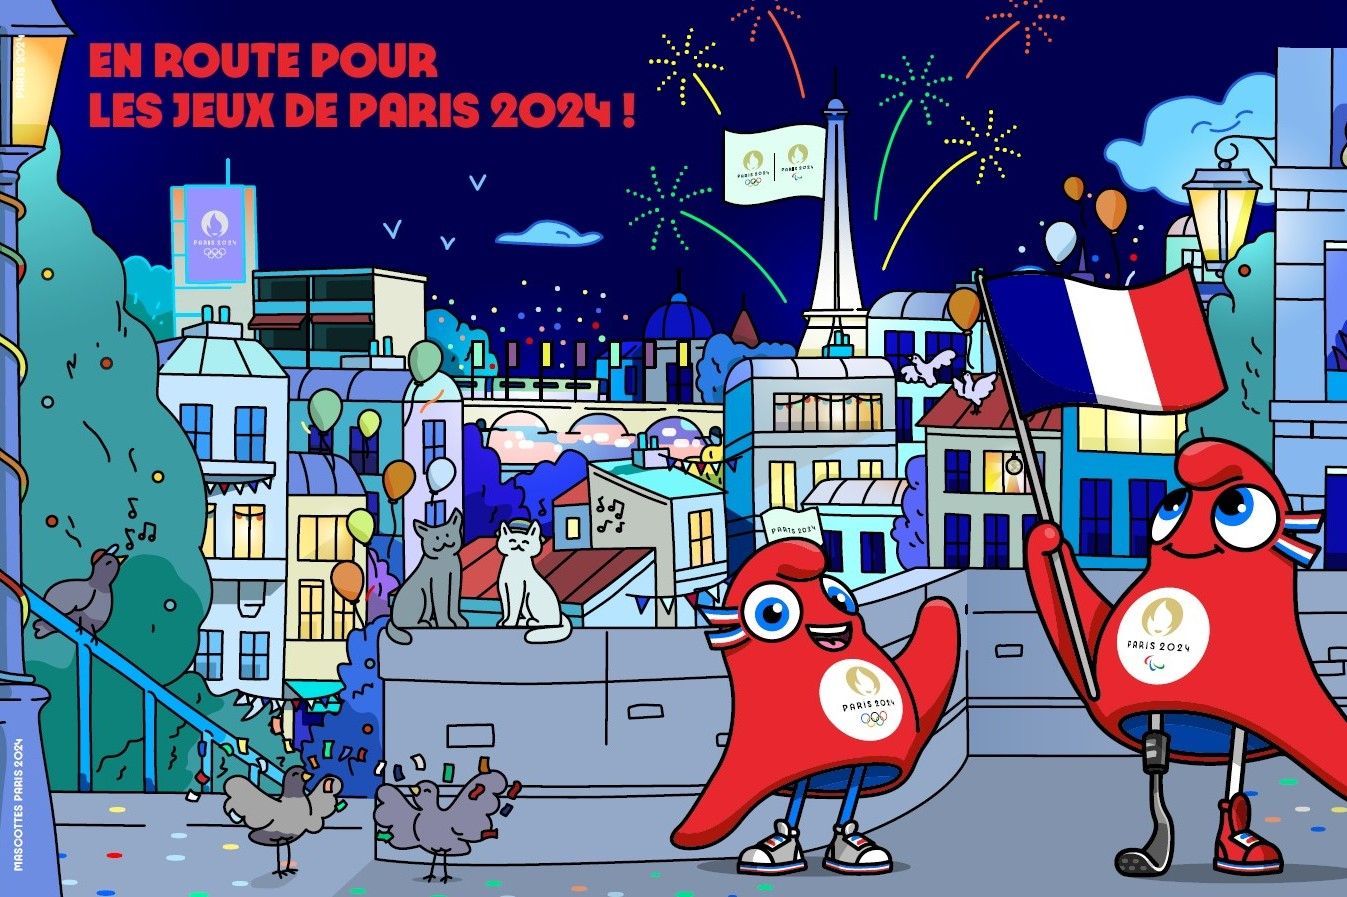 Who are the Phryges, the Paris 2024 mascots?